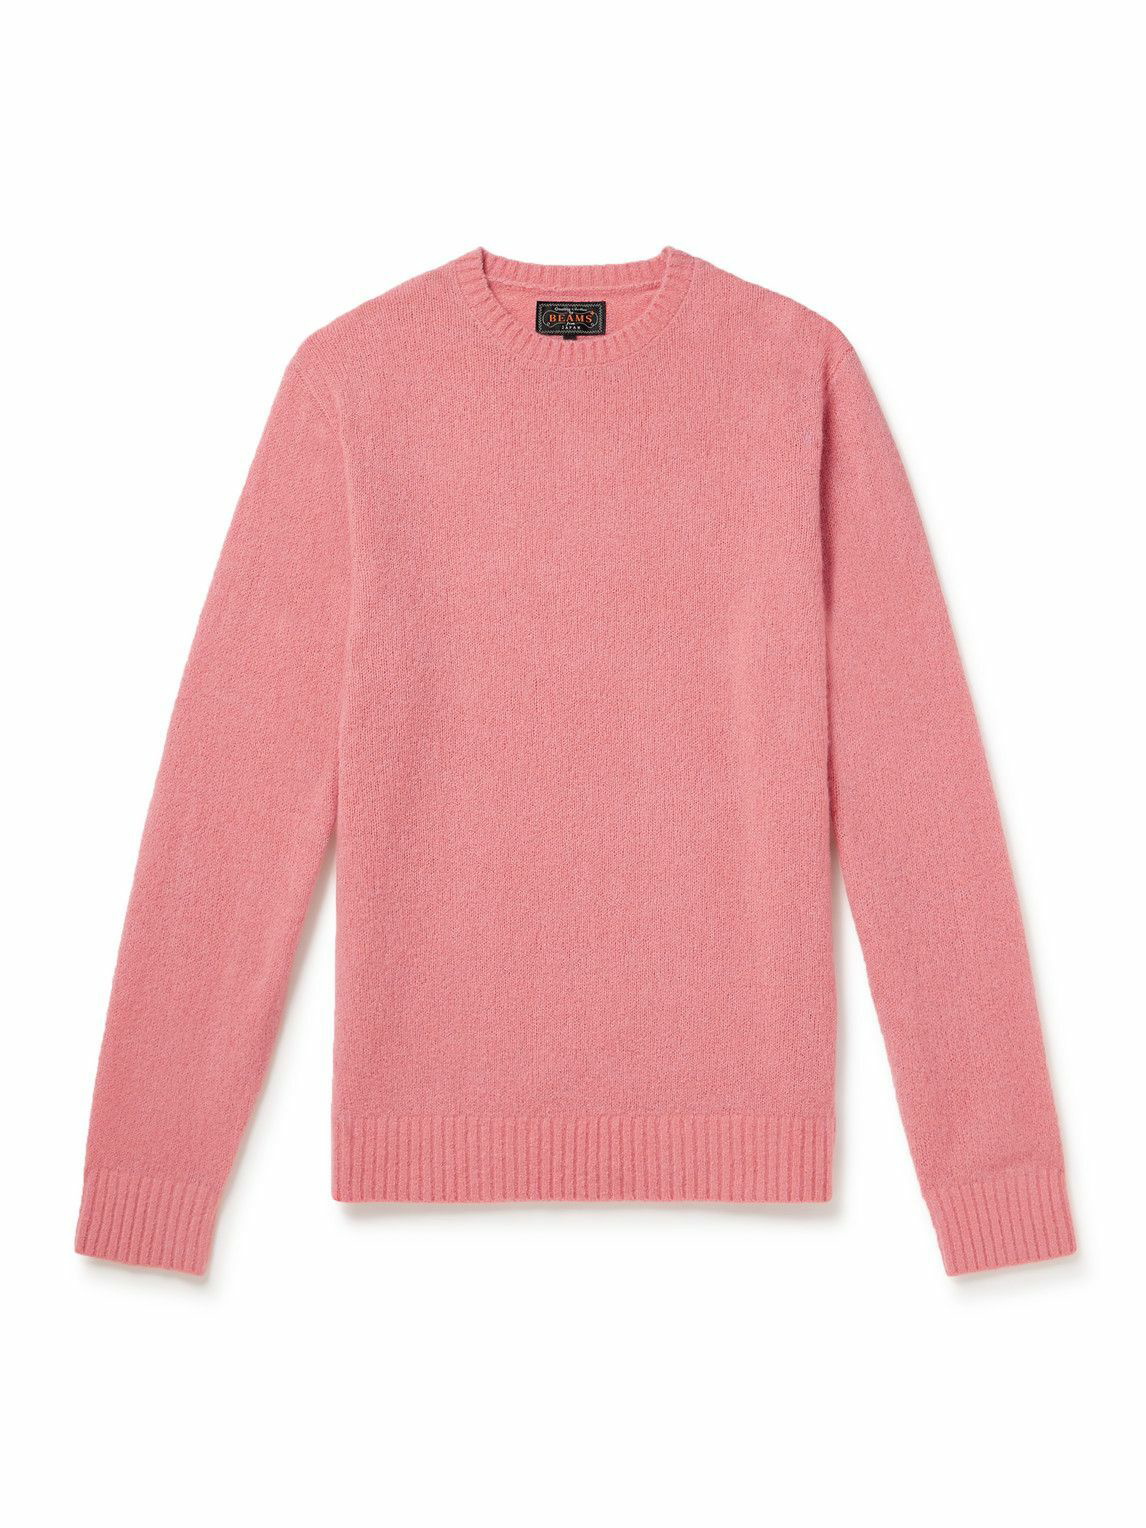 Photo: Beams Plus - Cashmere and Silk-Blend Sweater - Pink